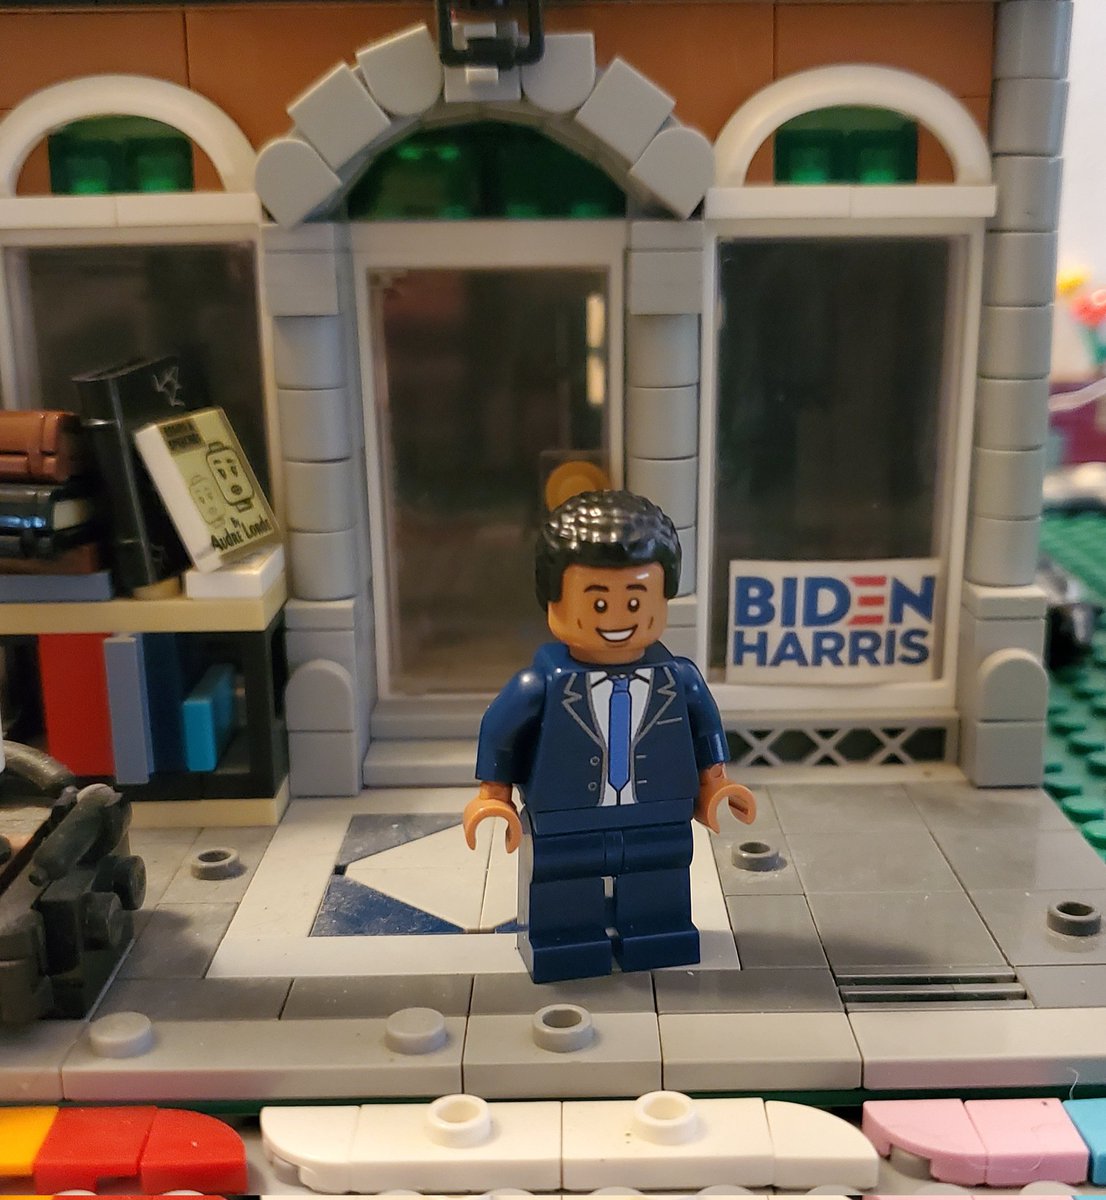 My next minifig is of @KnowaWasTaken I'd say he's one of the more impressive young people on this site, but, that's not true he's 1 of the more impressive people anywhere, any age. He's involved in voter outreach, education, volunteers (113/-1) #MinifigDemocracyProject